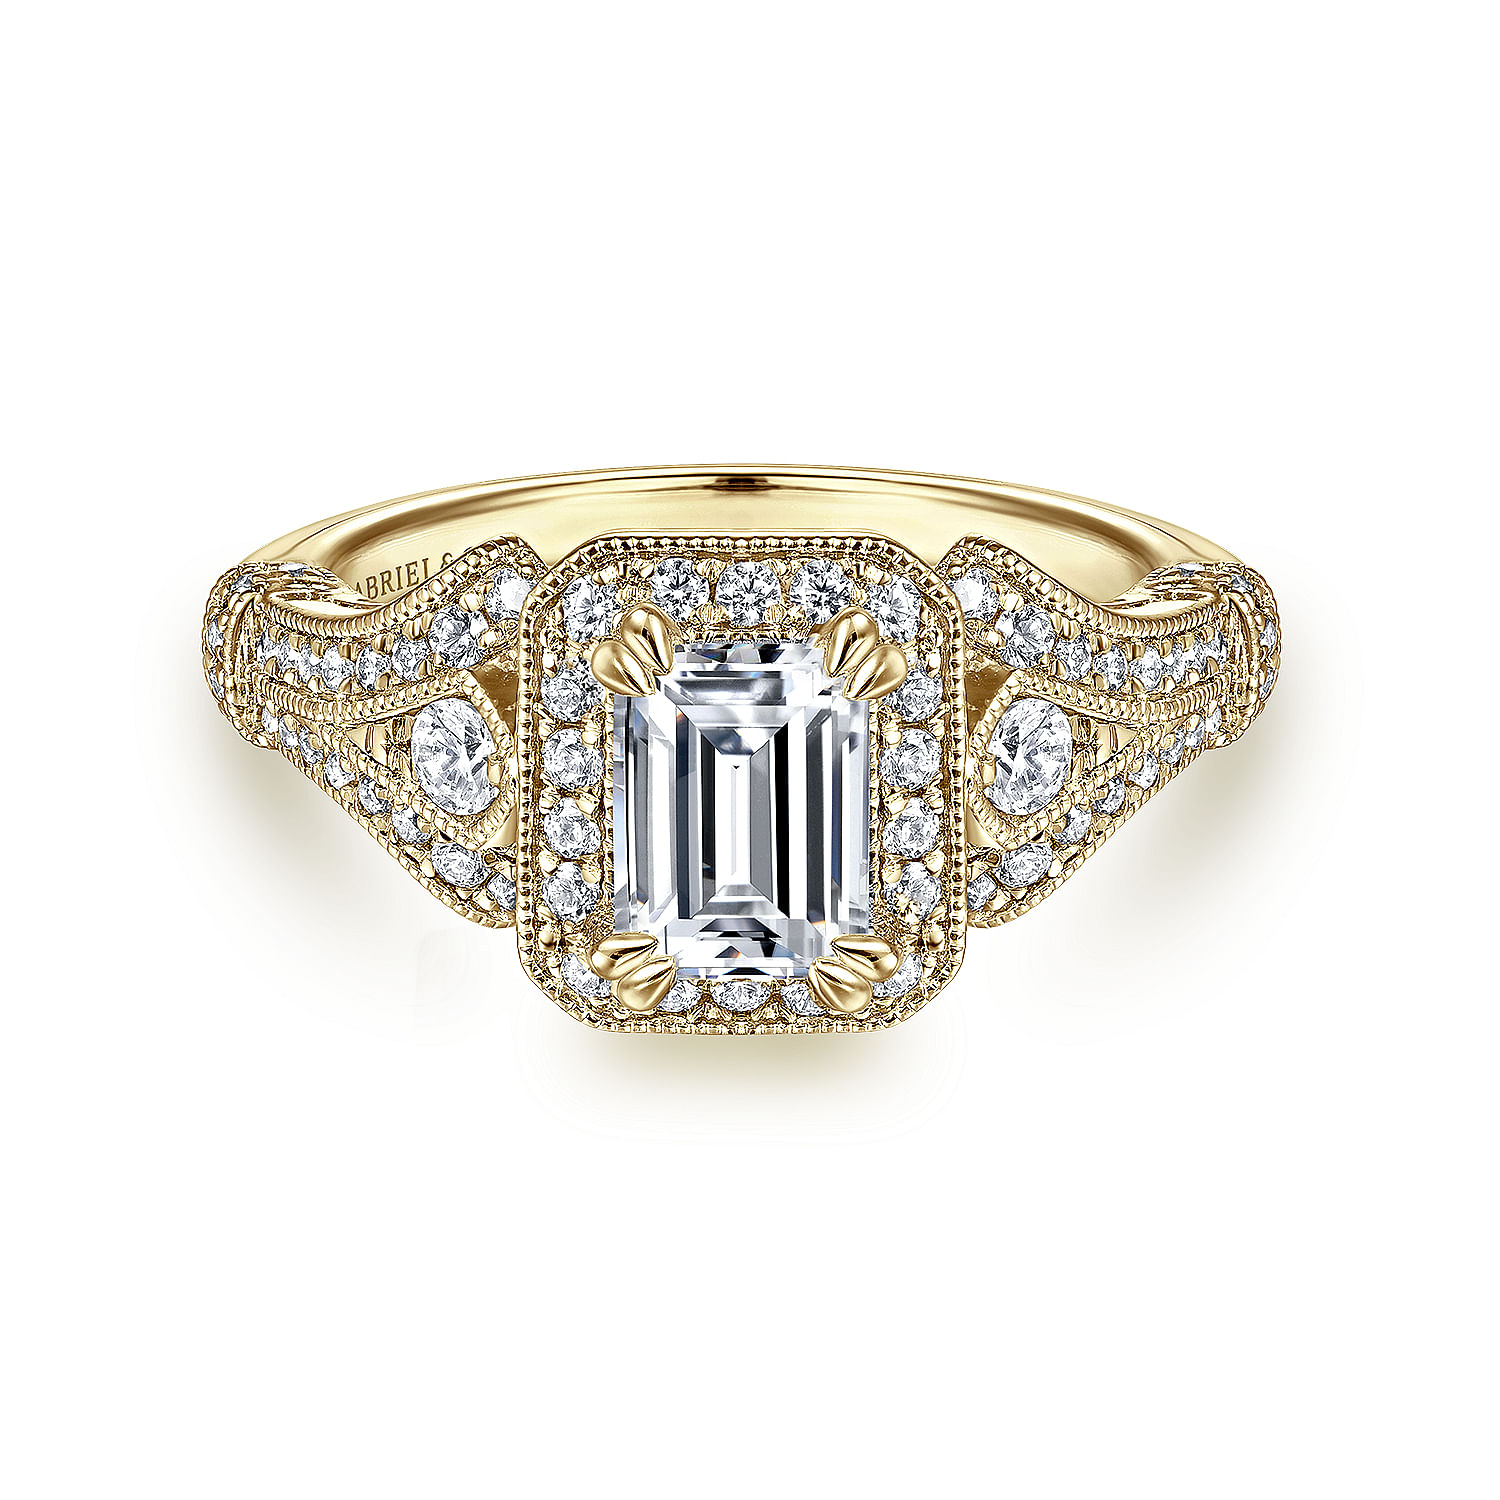 Vintage Inspired 14K Yellow Gold Halo Emerald Cut Diamond Engagement Ring